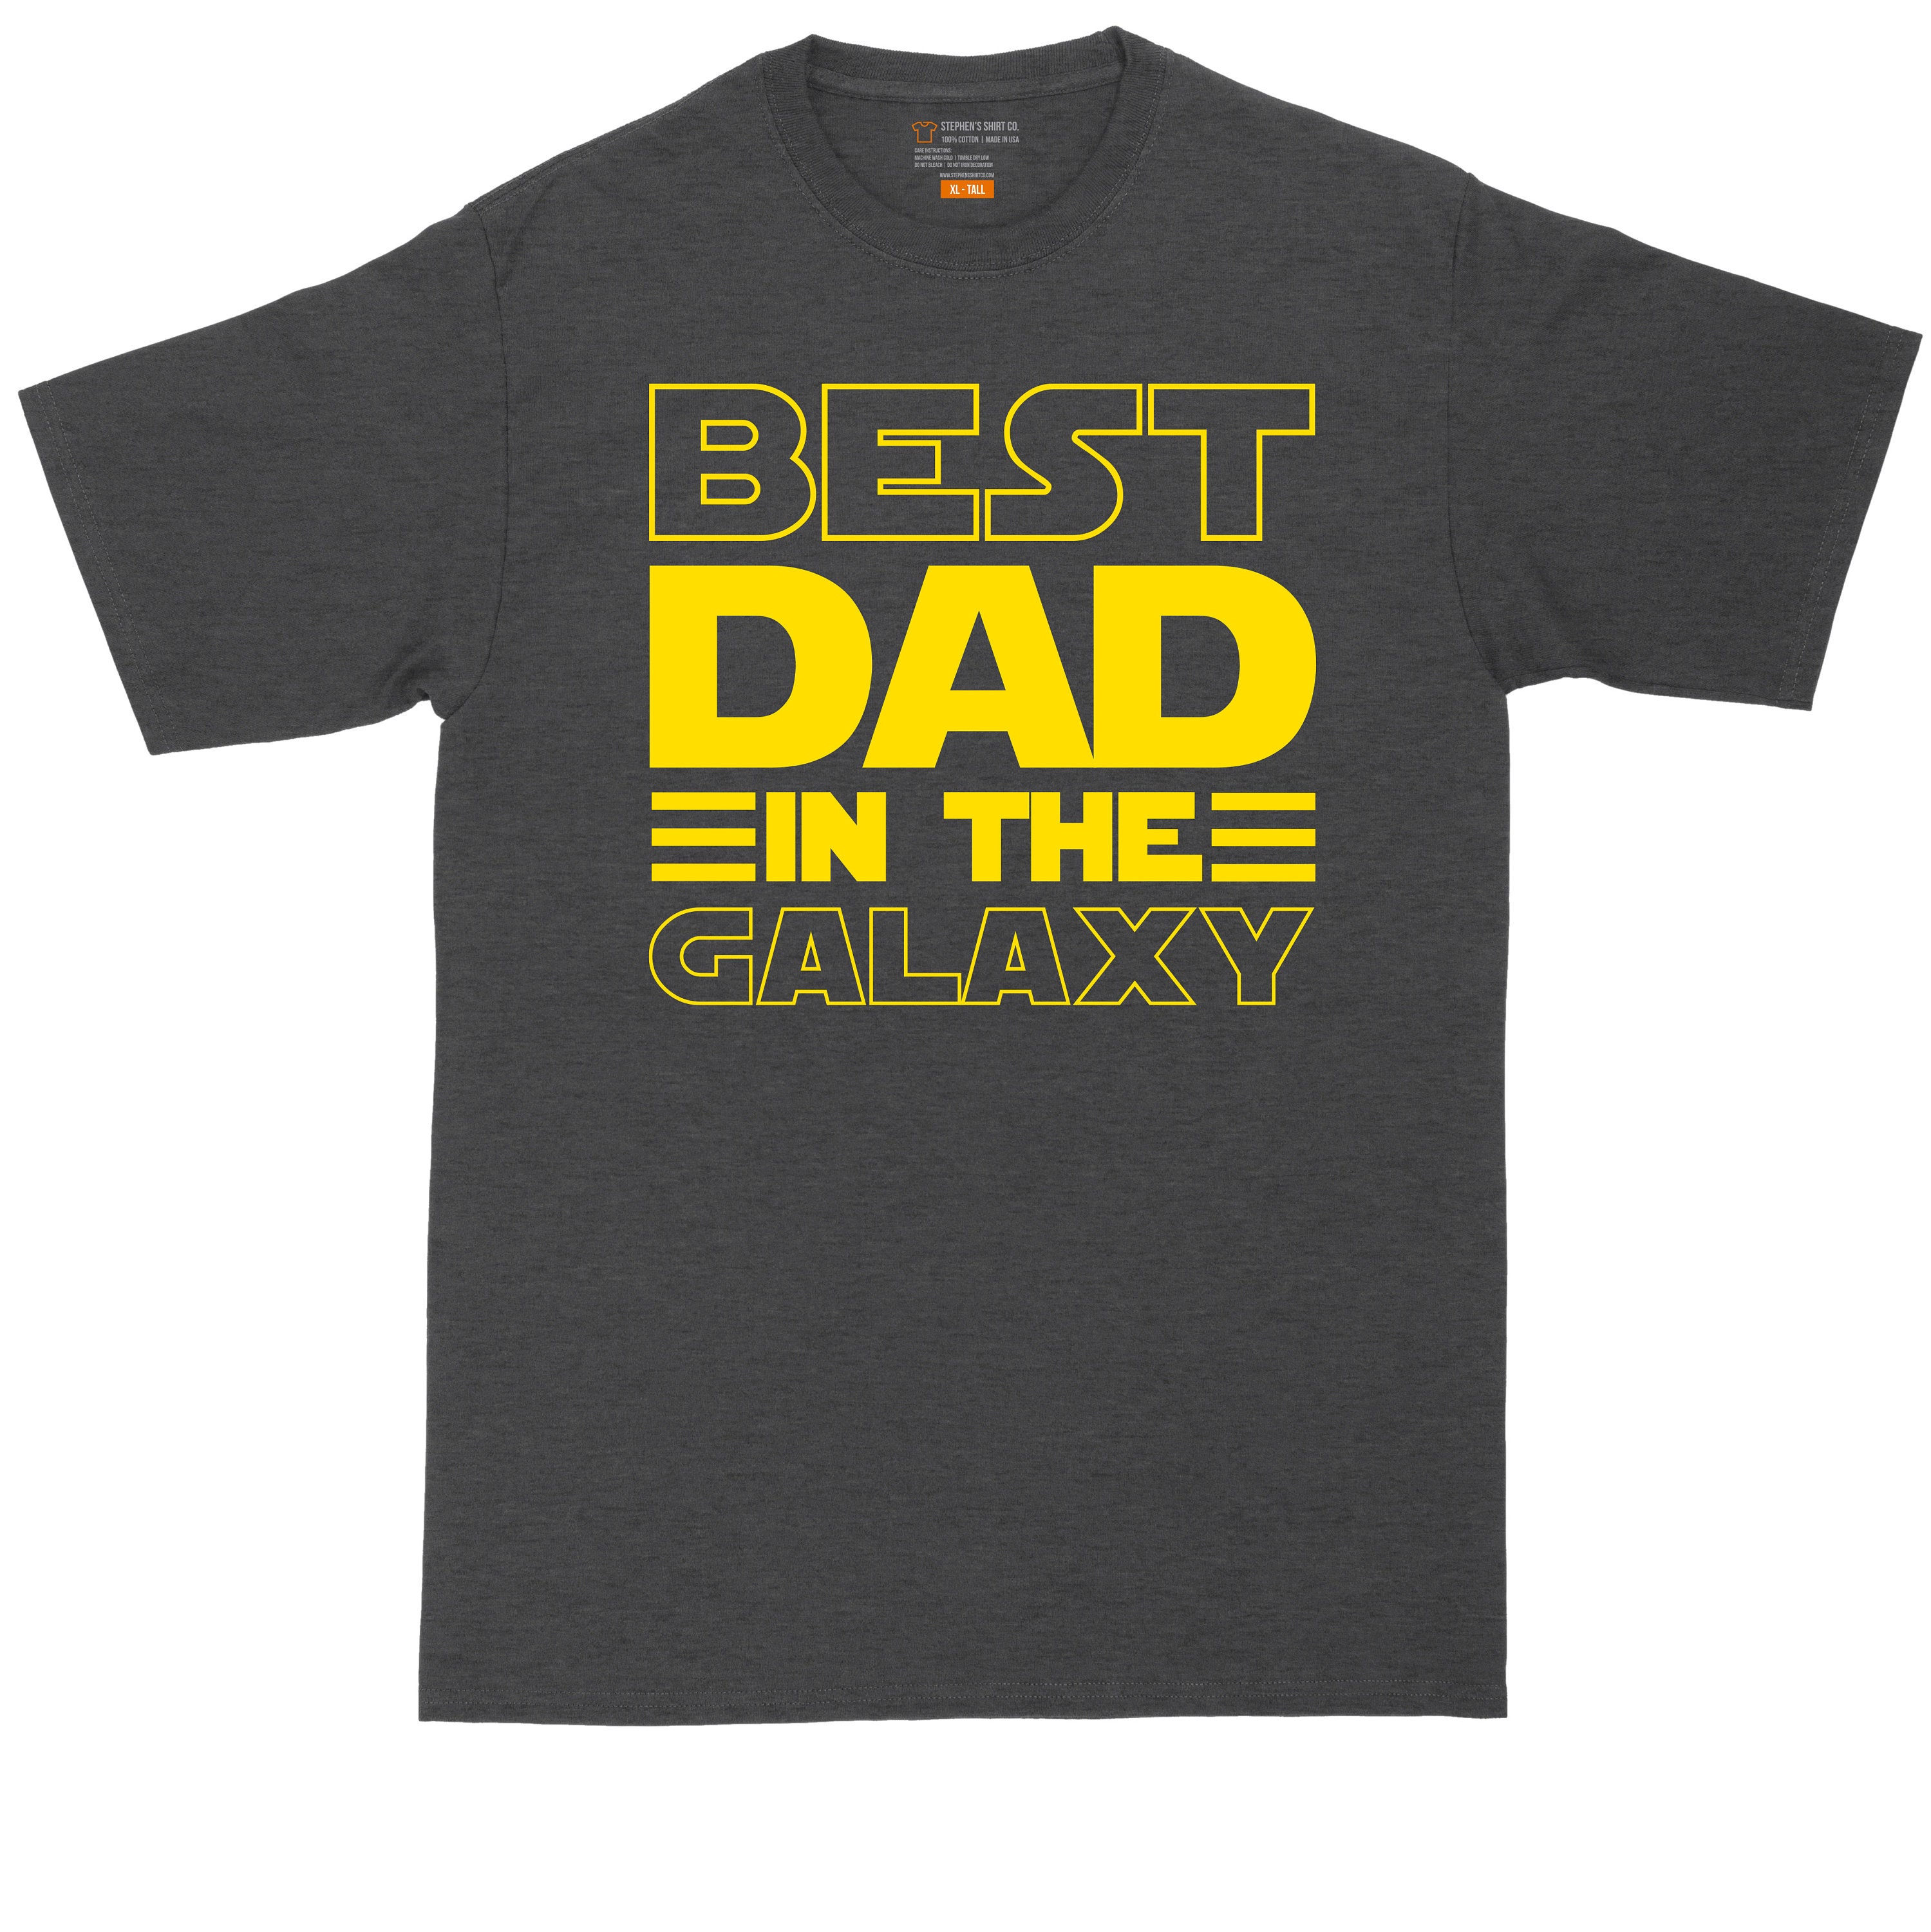 Discover Best Dad in the Gallaxy | Big and Tall Men | Fathers Day Present | Gift for Him